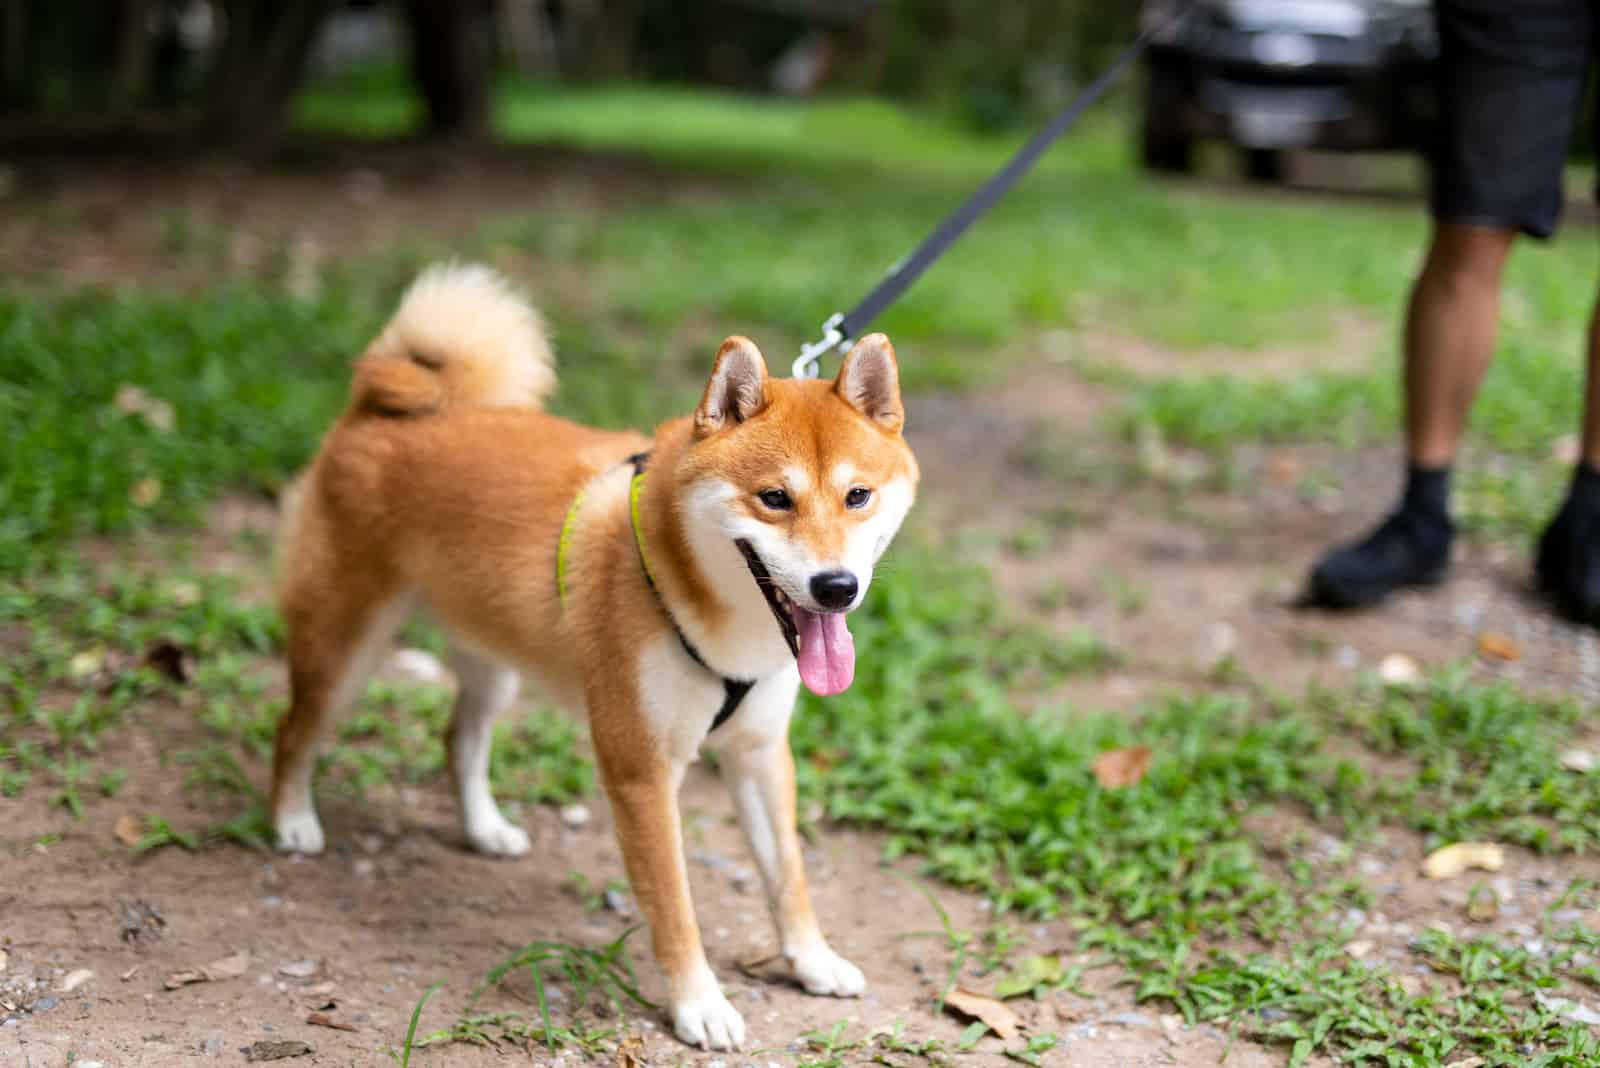 Man owner taking Shiba Inu dog on leash walking in the park